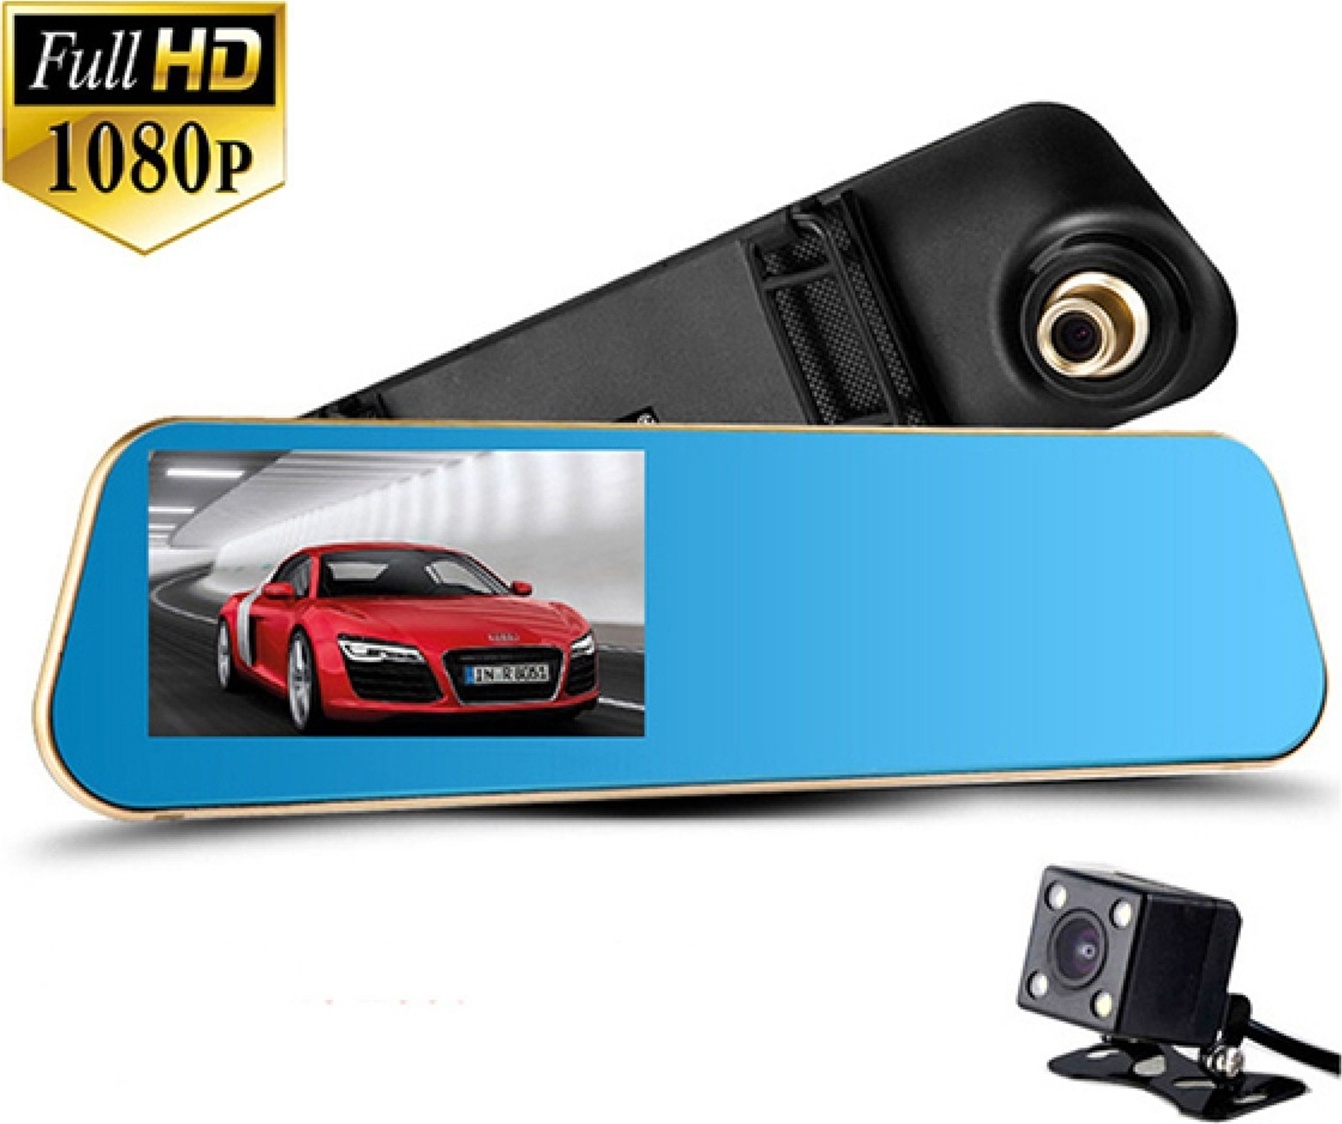 Car Black Box Kit - Includes Car DVR Camera Recorder with 2.5-Inch Screen  and HDMI Out